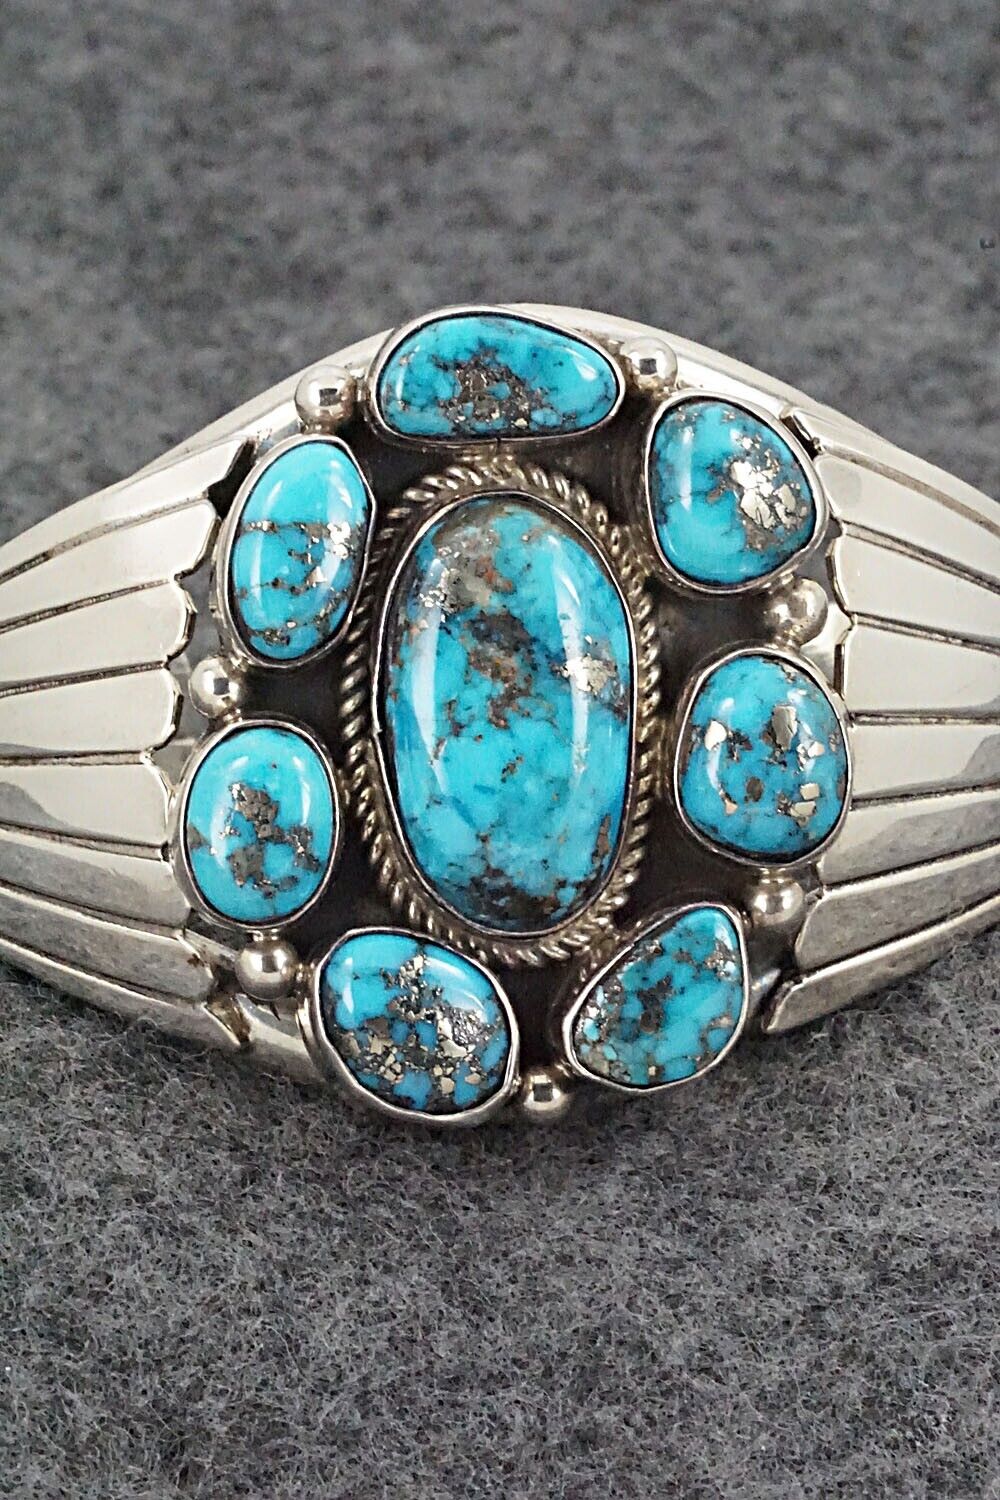 Turquoise and Sterling Silver Bracelet - Ted Brea